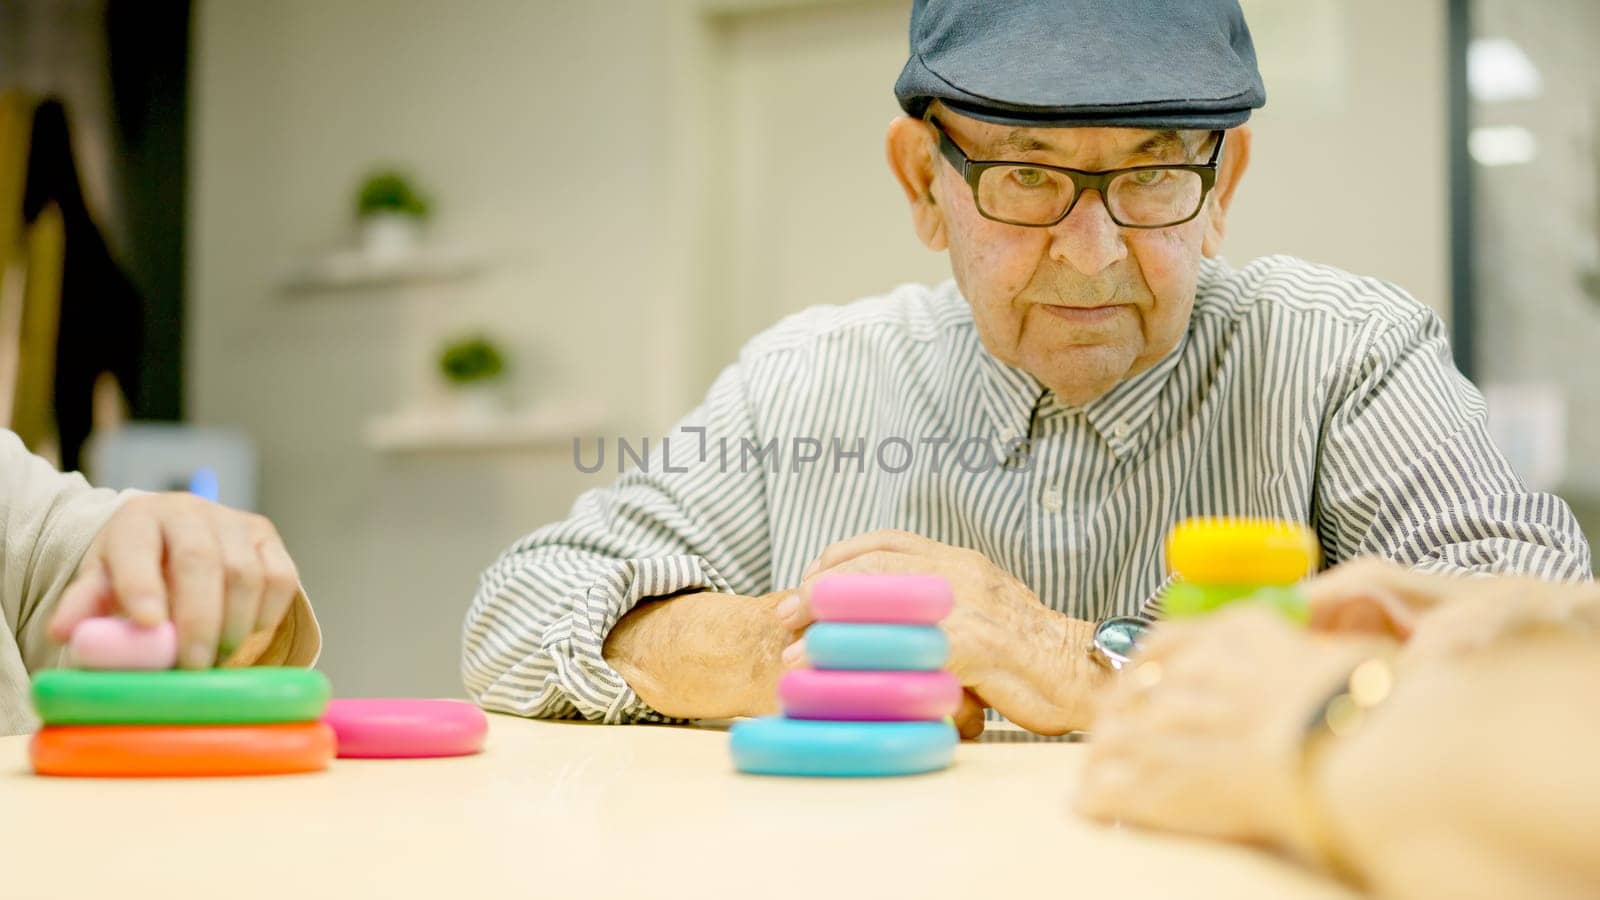 Senior man with beret looking at camera with serious look in a geriatrics